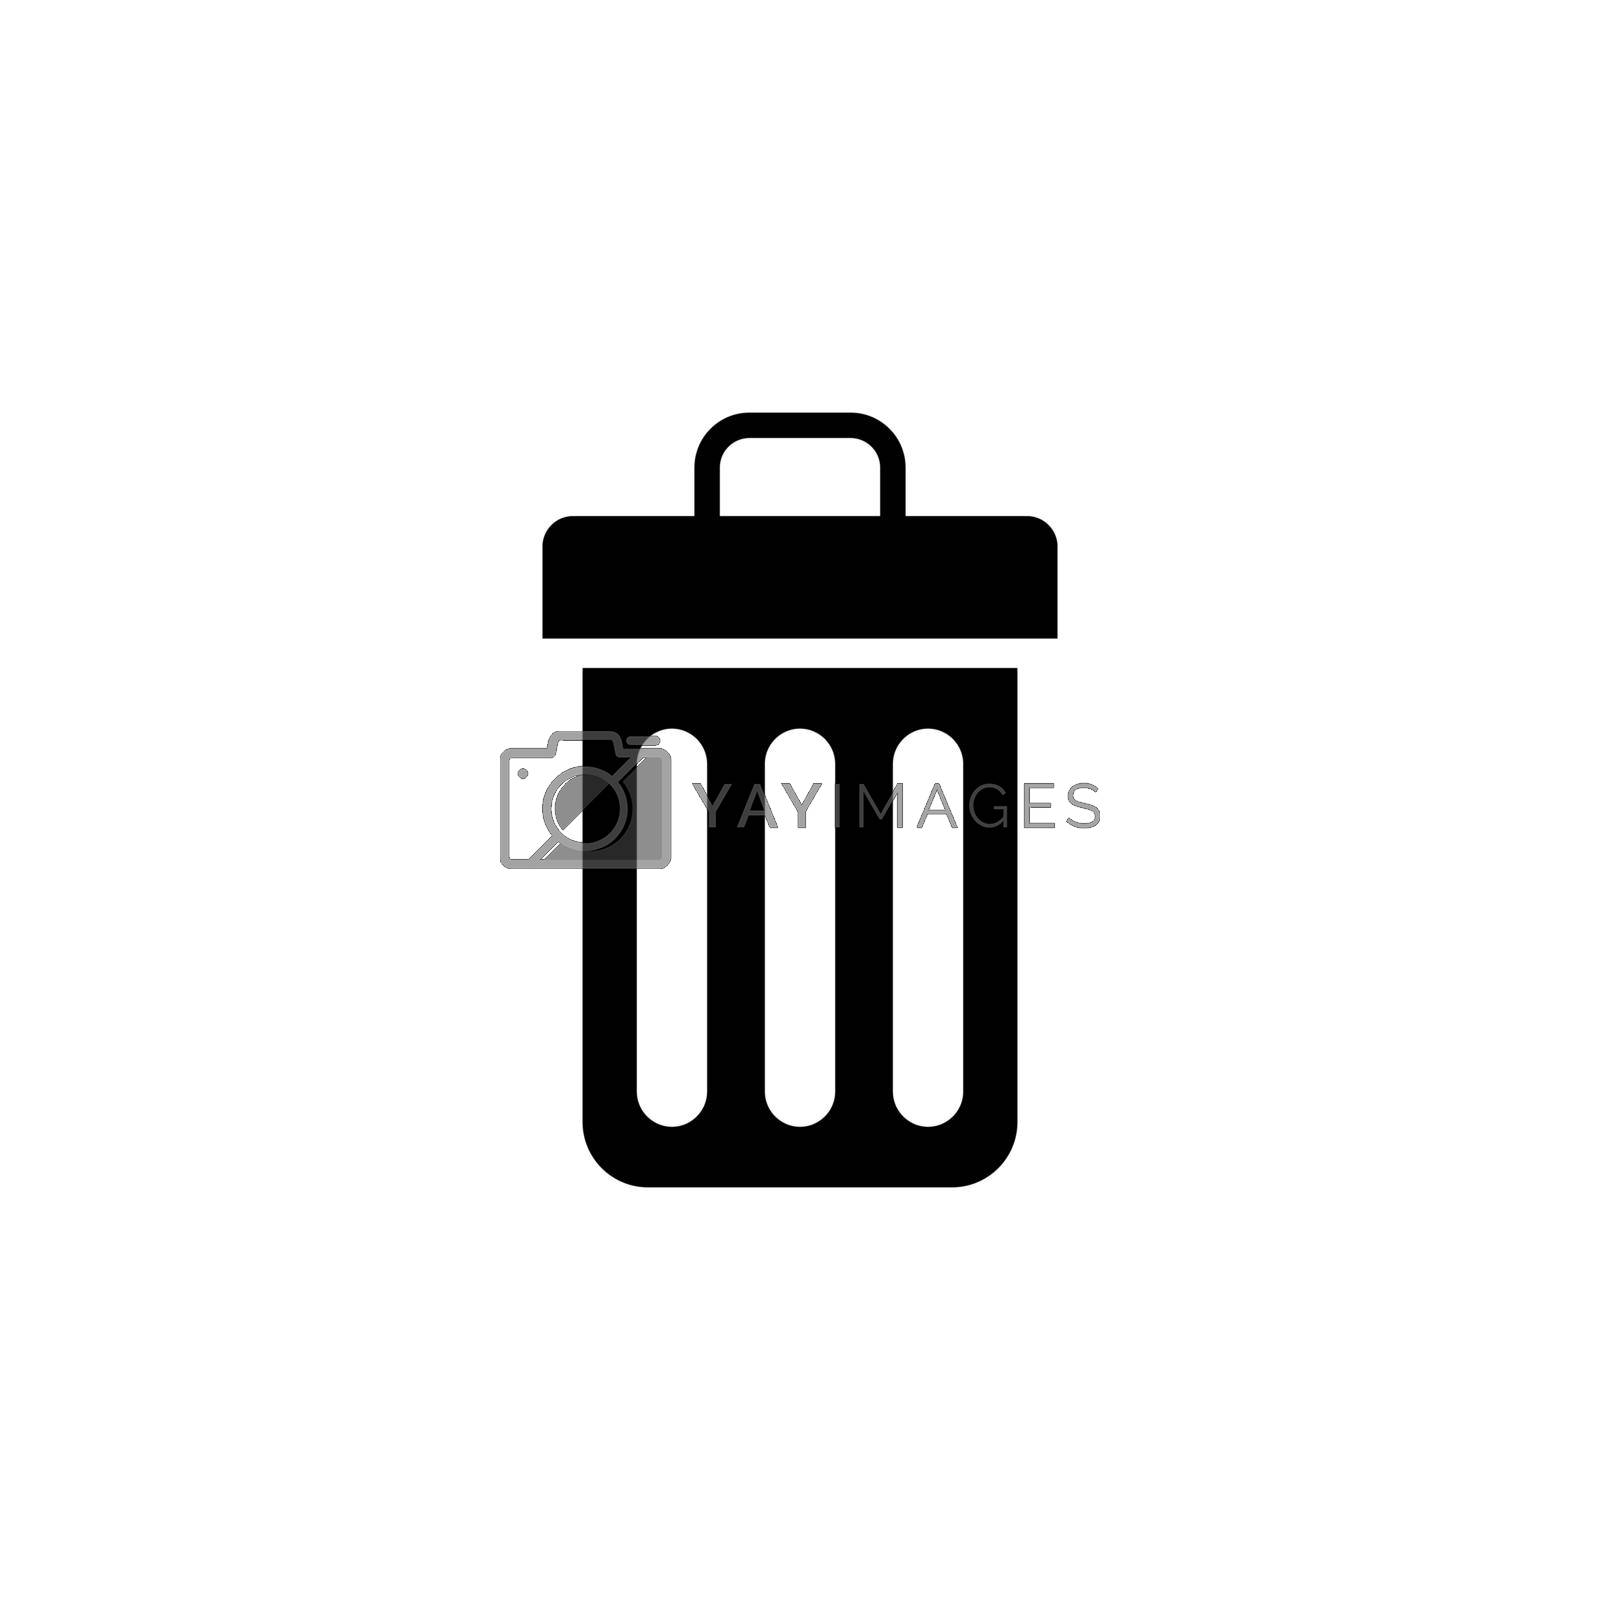 Royalty free image of Trash Can Bin Flat Vector Icon by sfinks